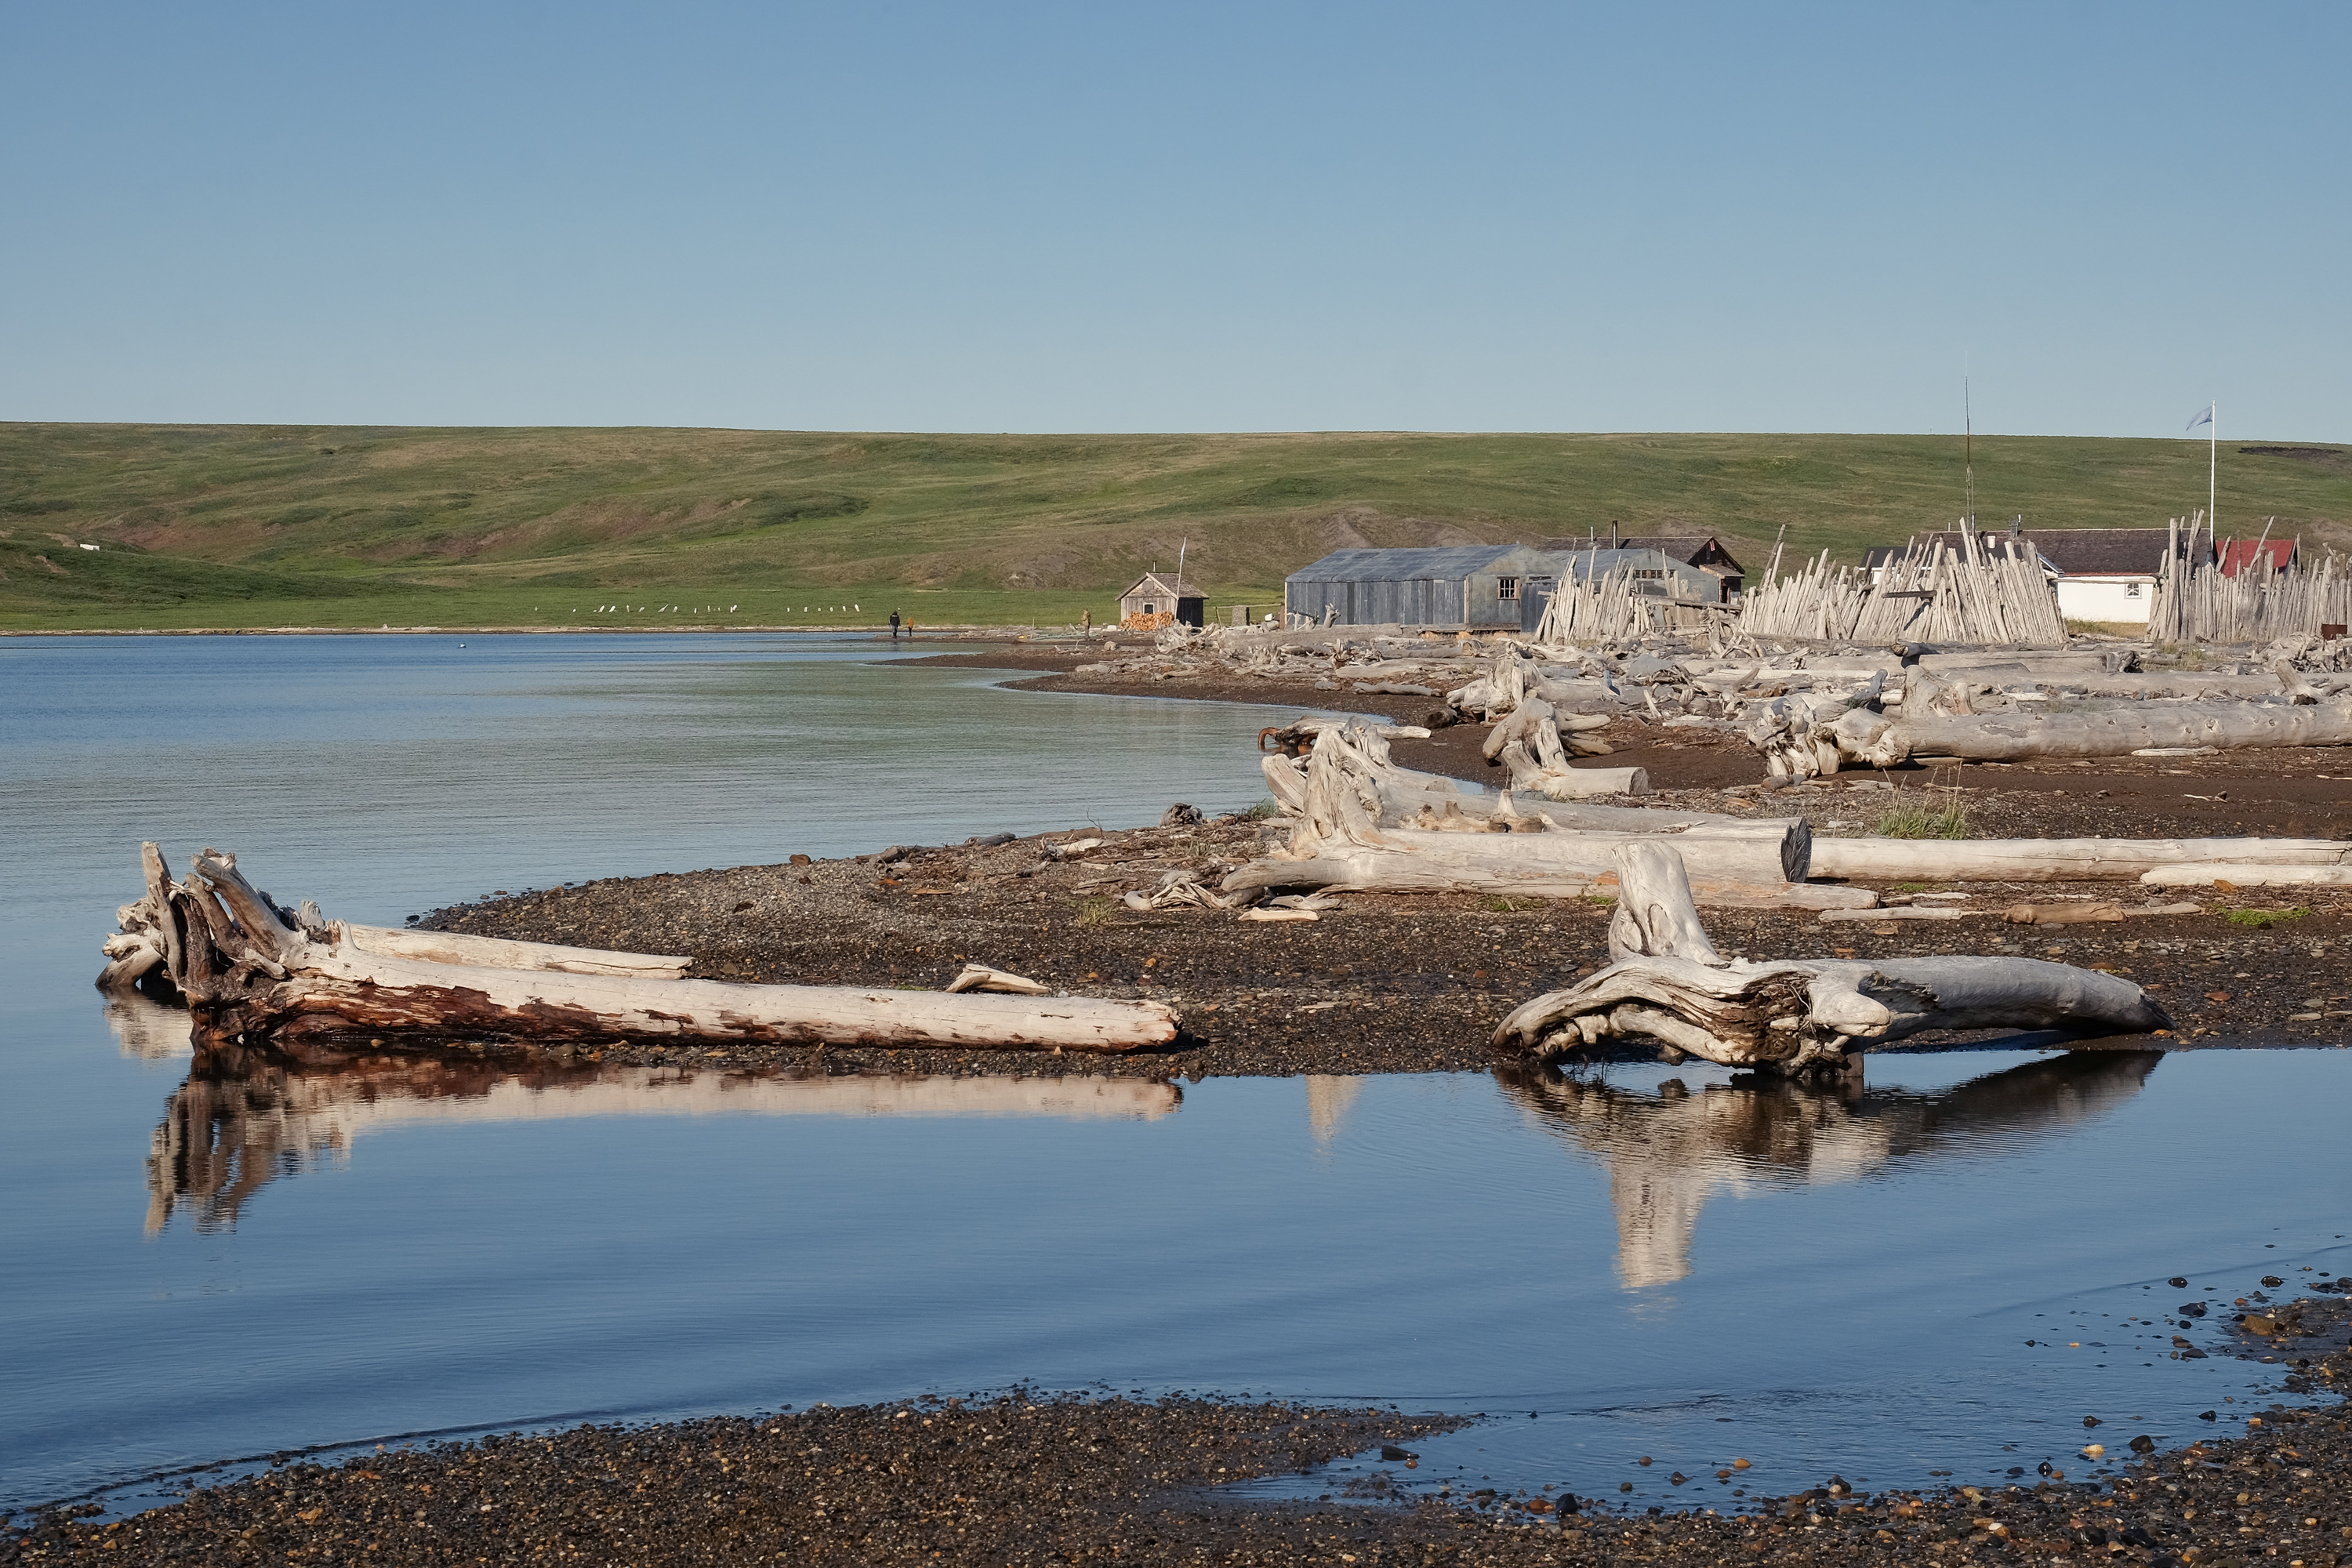 Driftwood at Pauline Cove, with the Northern Whaling and Trading Company store and other buildings visible in the background. Photo source: Sandra Angers-Blondin, https://www.vanishingislandphoto.comhttps://www.instagram.com/sandra.angers.b/